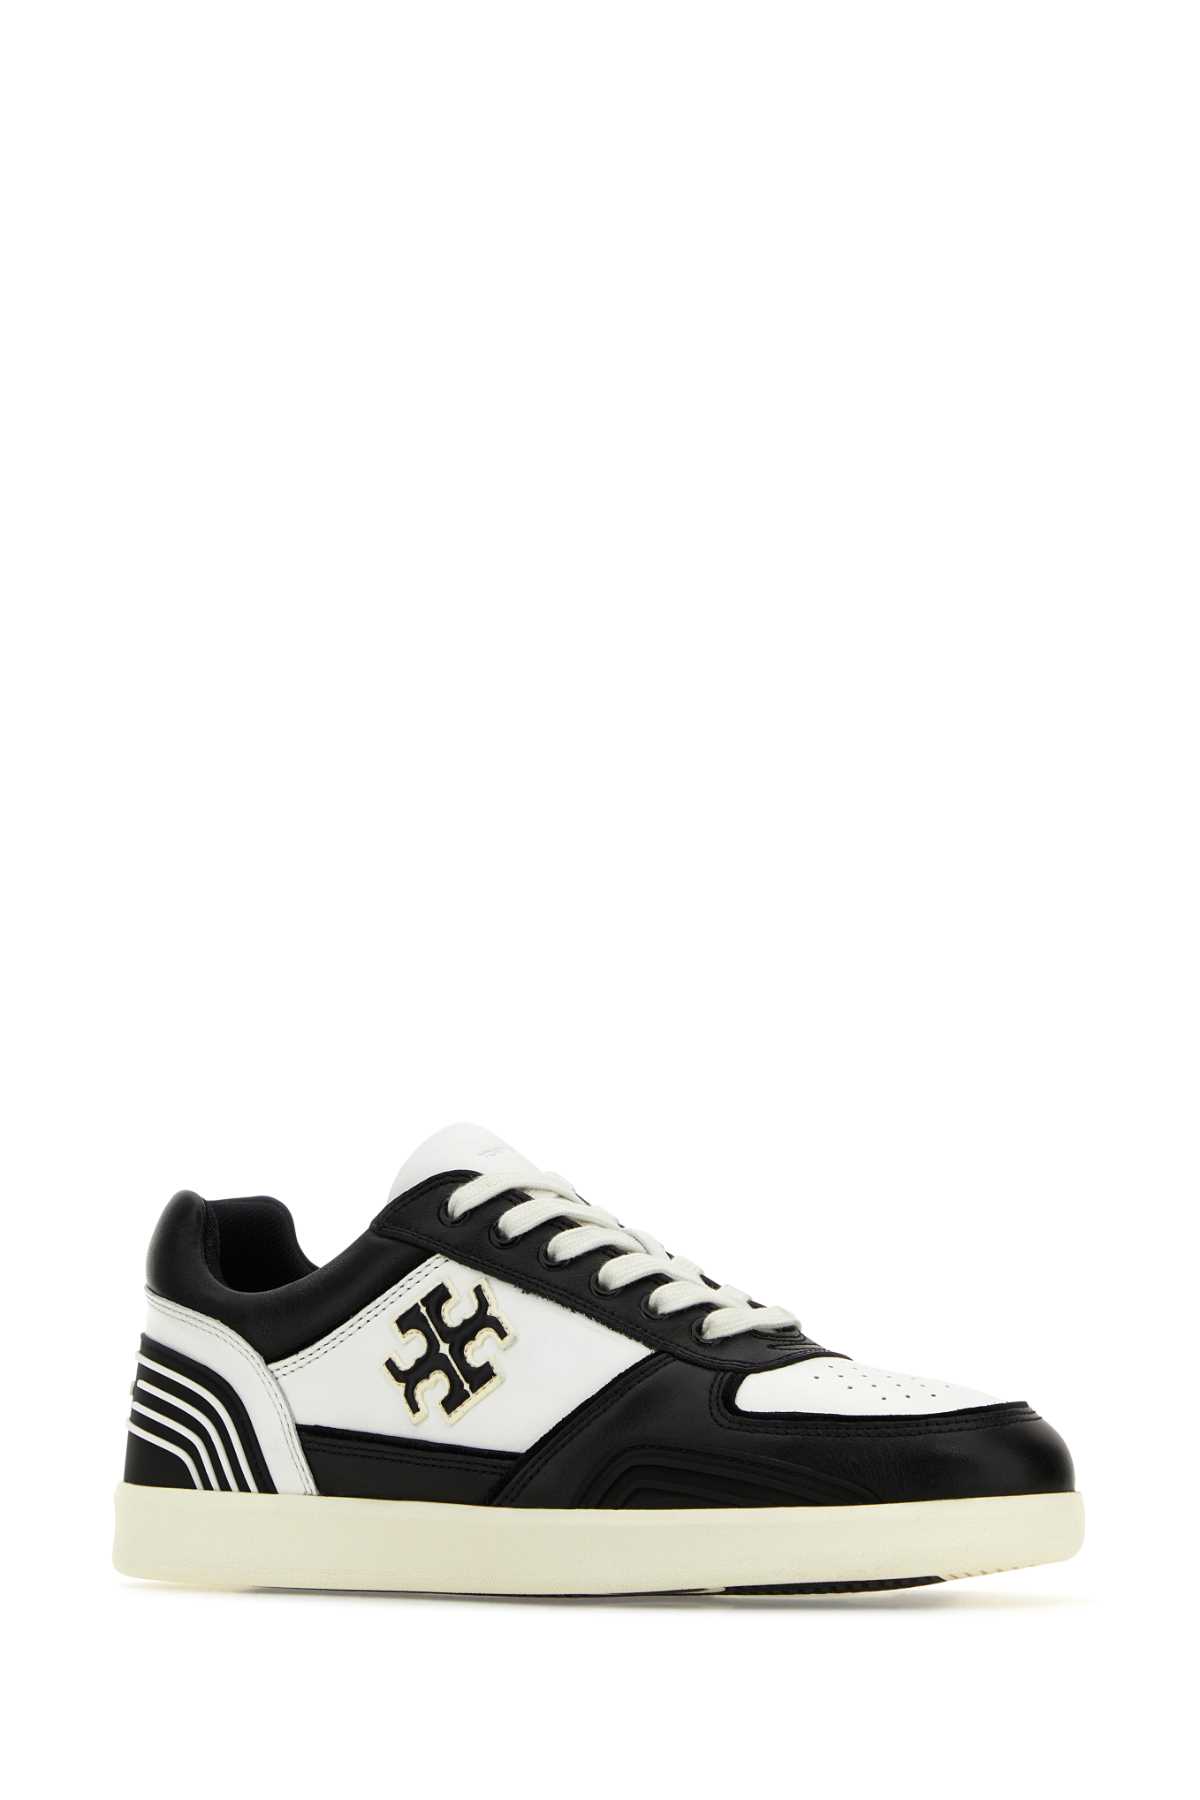 Shop Tory Burch Two-tone Leather Clover Court Sneakers In Purityperfectblack